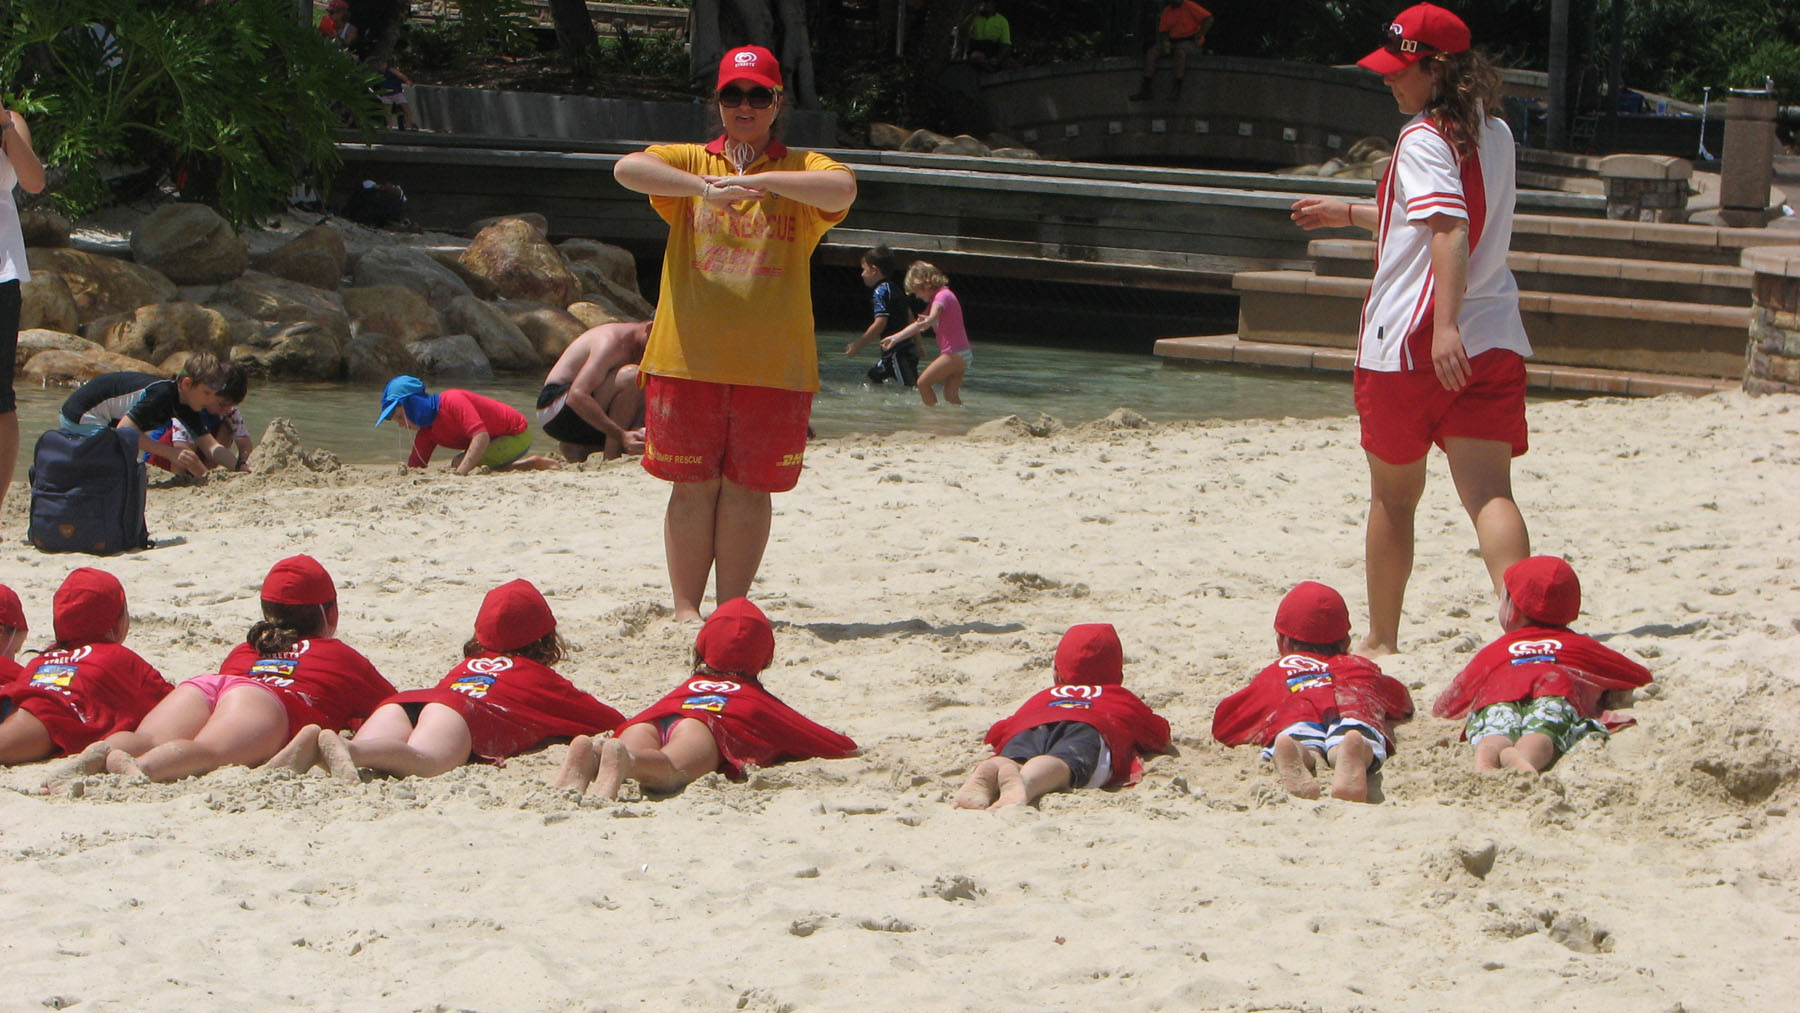 Nippers get instructions